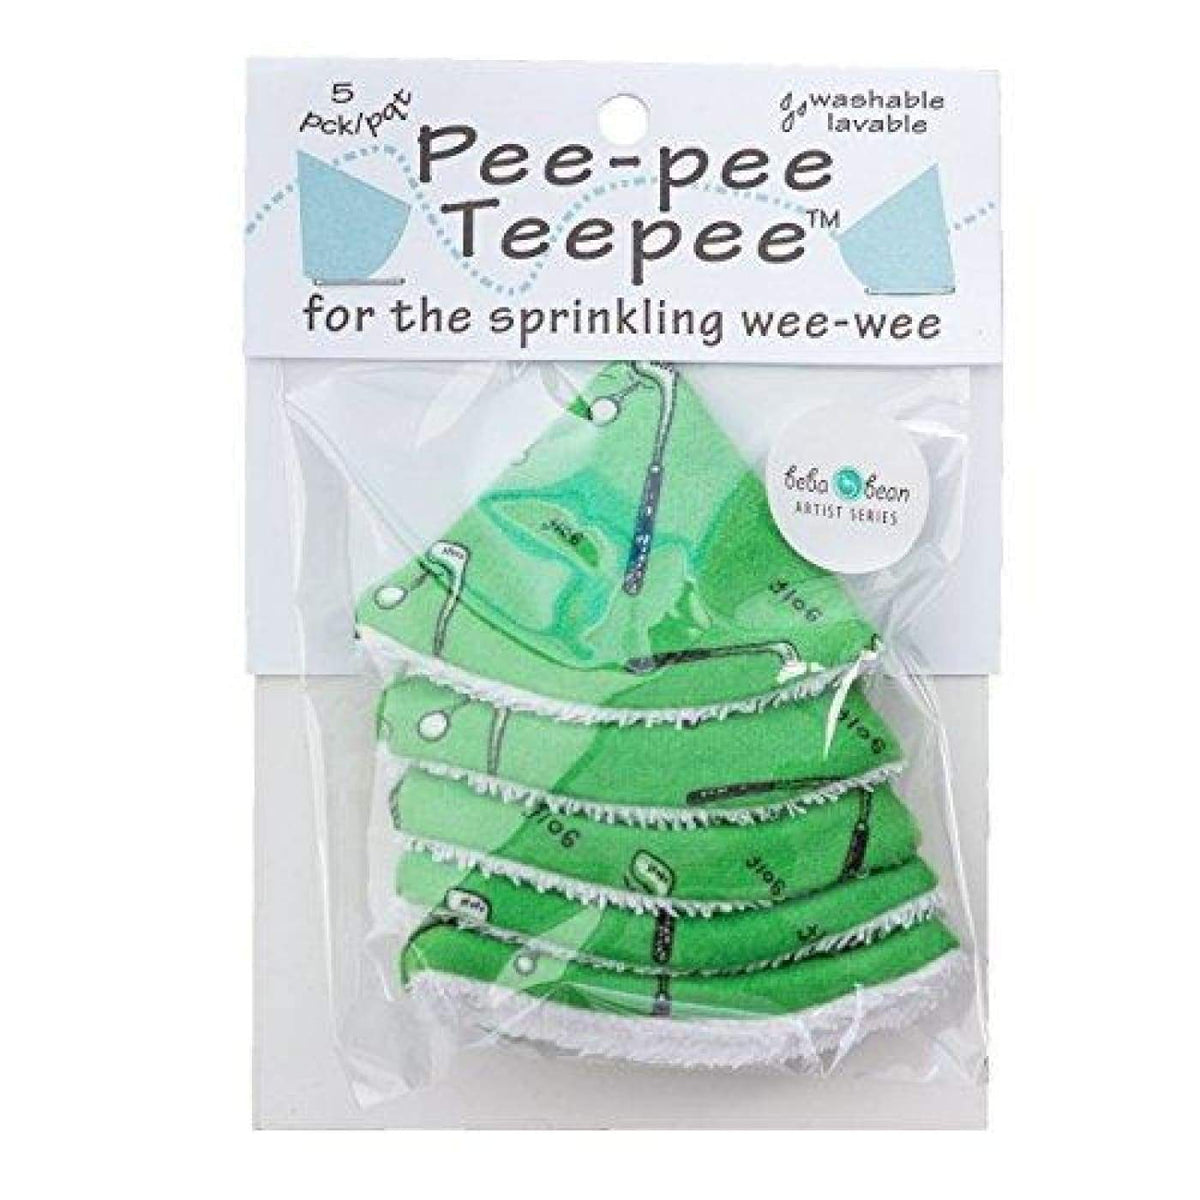 Pee-pee Teepee - Golf - BATHTIME &amp; CHANGING - NAPPIES/WIPES/ACCESSORIES